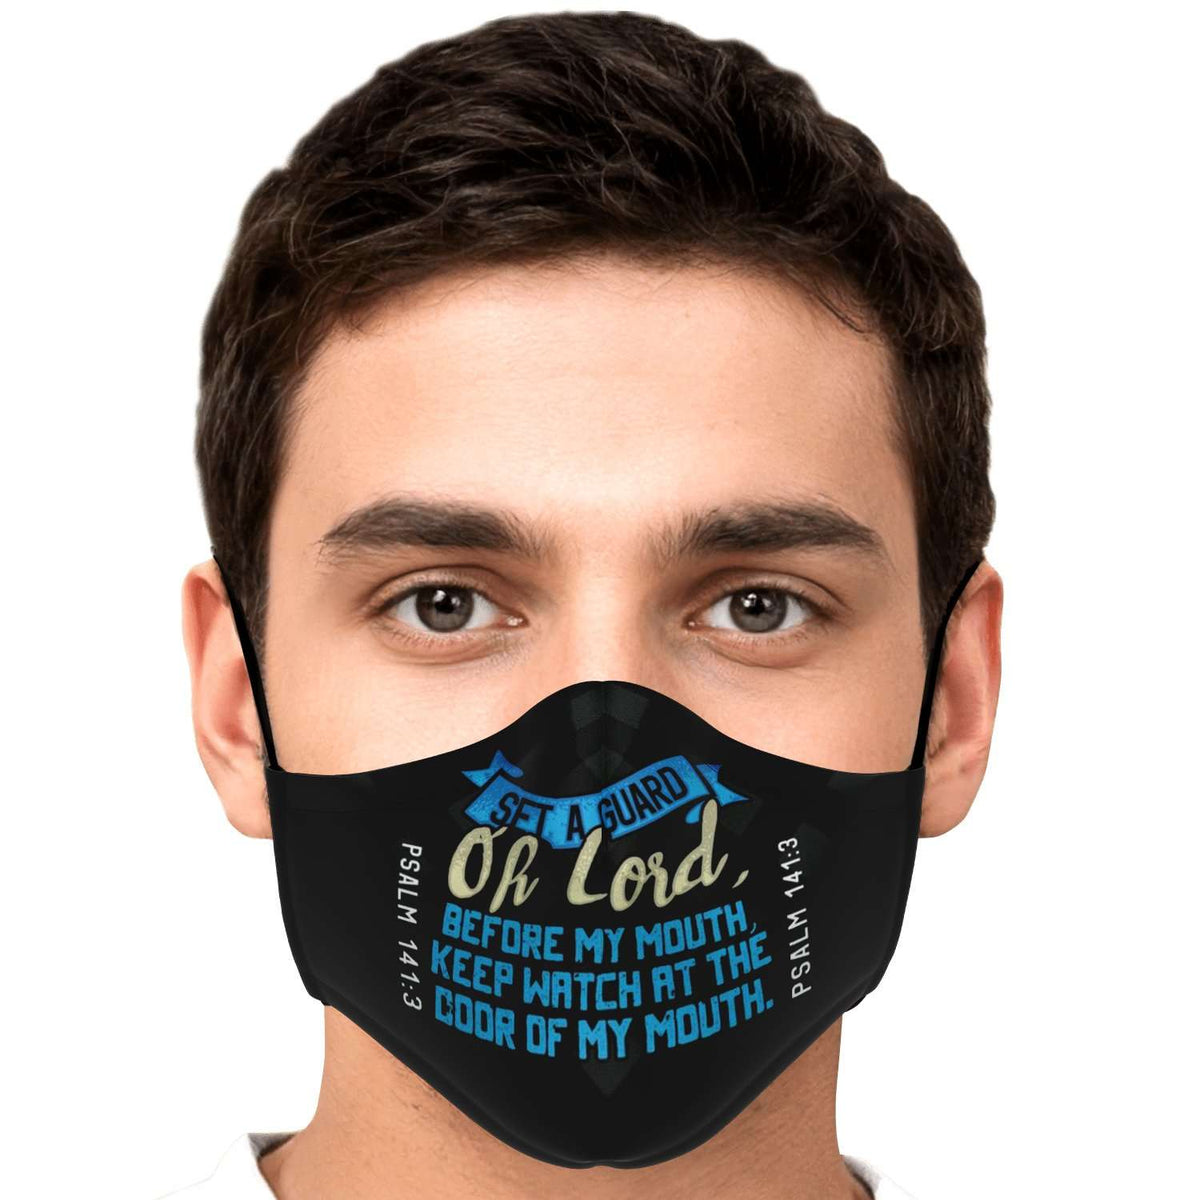 Designs by MyUtopia Shout Out:Set a Guard Oh Lord Adjustable Ear Loop Face Mask,Adult / Single / No filters,Fabric Face Mask